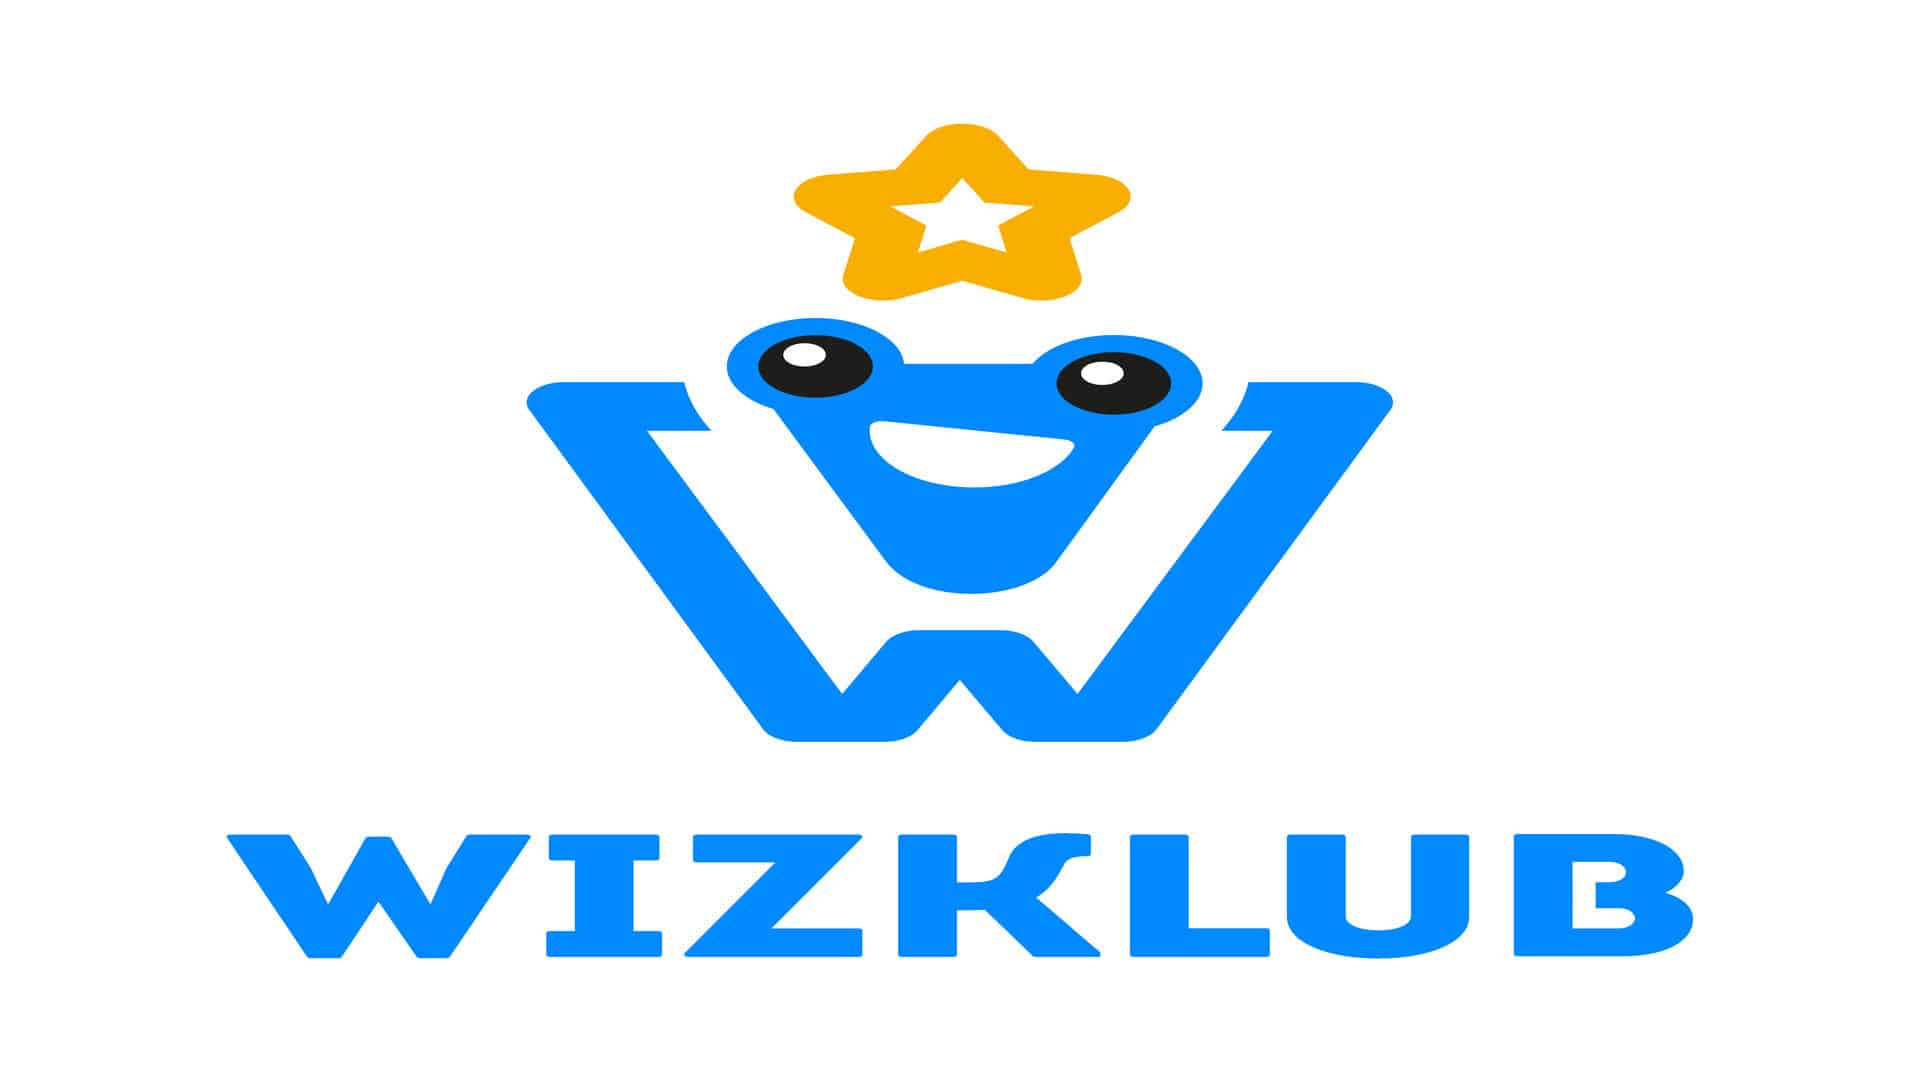 Children as young as 5-6 years can learn about IoT, AI, ML and more with WizKlub